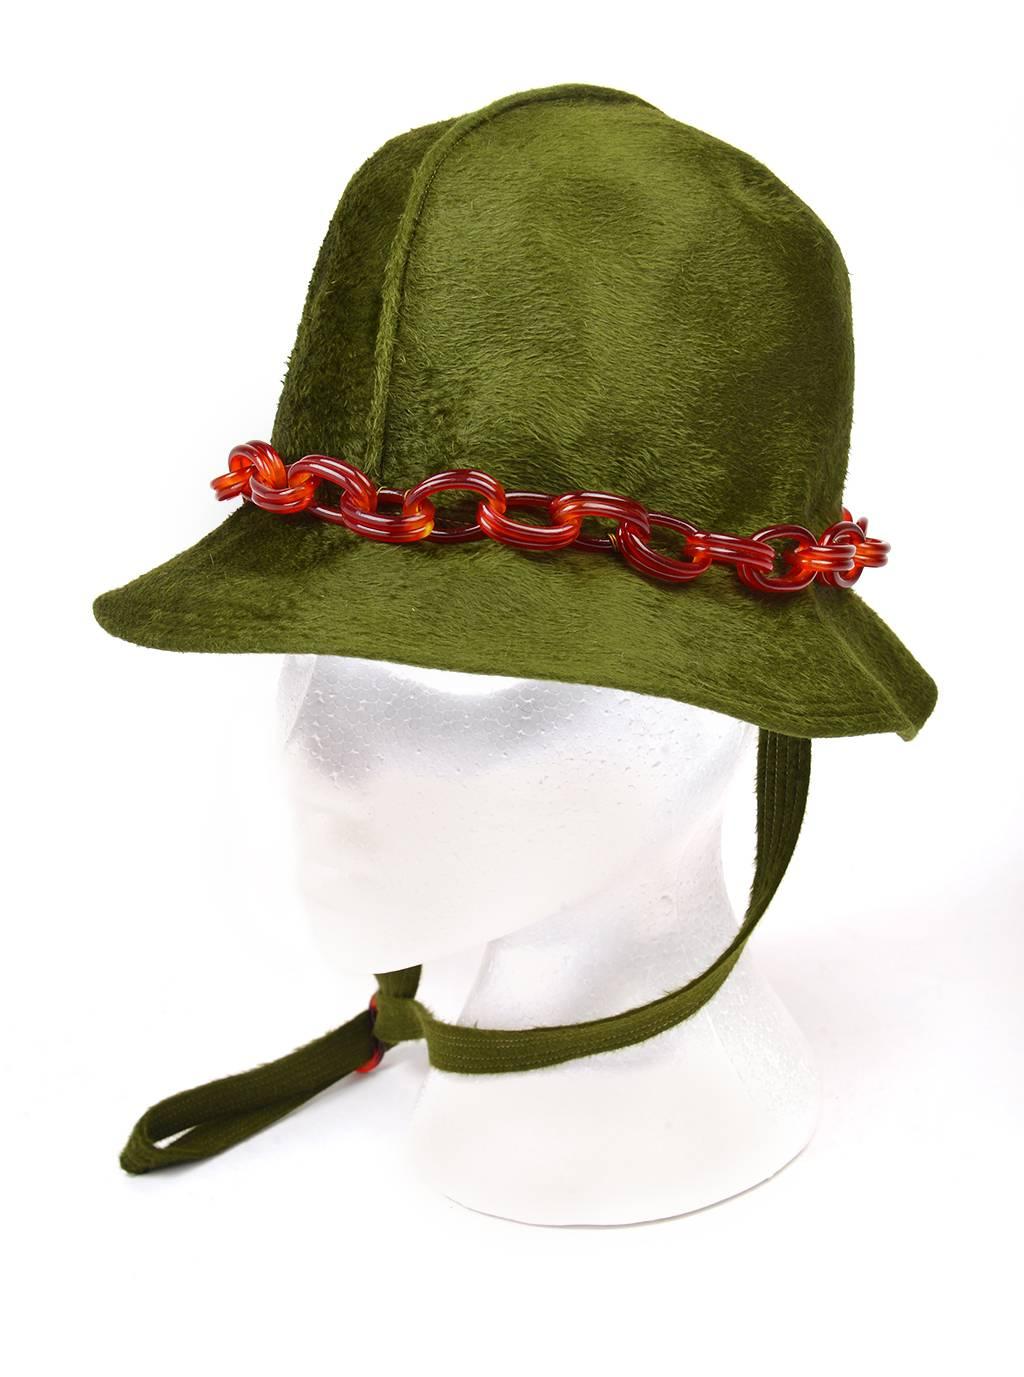 
Funky 1970s Mr John Jr Trevi bucket hat. This wide-brimmed hat is accented with a stitch ridge running front to back, a well as a tortoiseshell oval link Lucite chain band, and a tortoiseshell Lucite neck toggle. The hat is soft and sleek, and